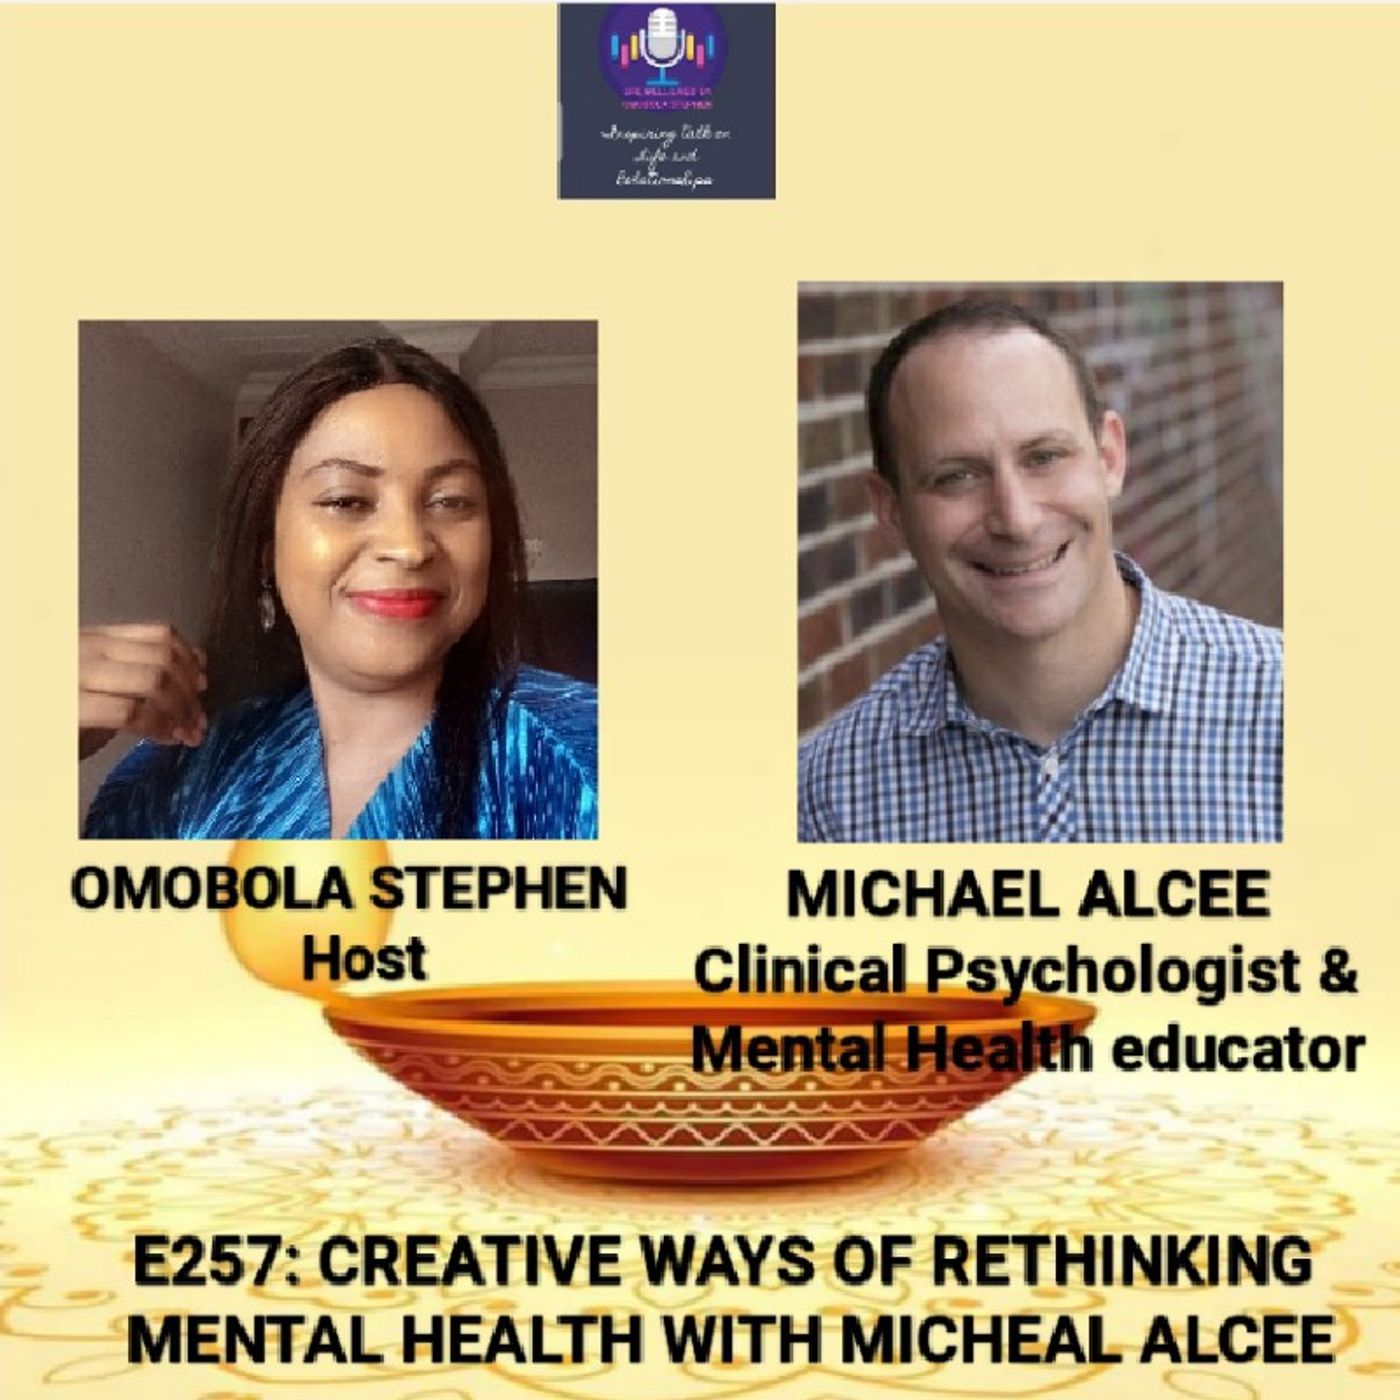 E257: Creative Ways Of Rethinking Mental Health With Micheal Alcee